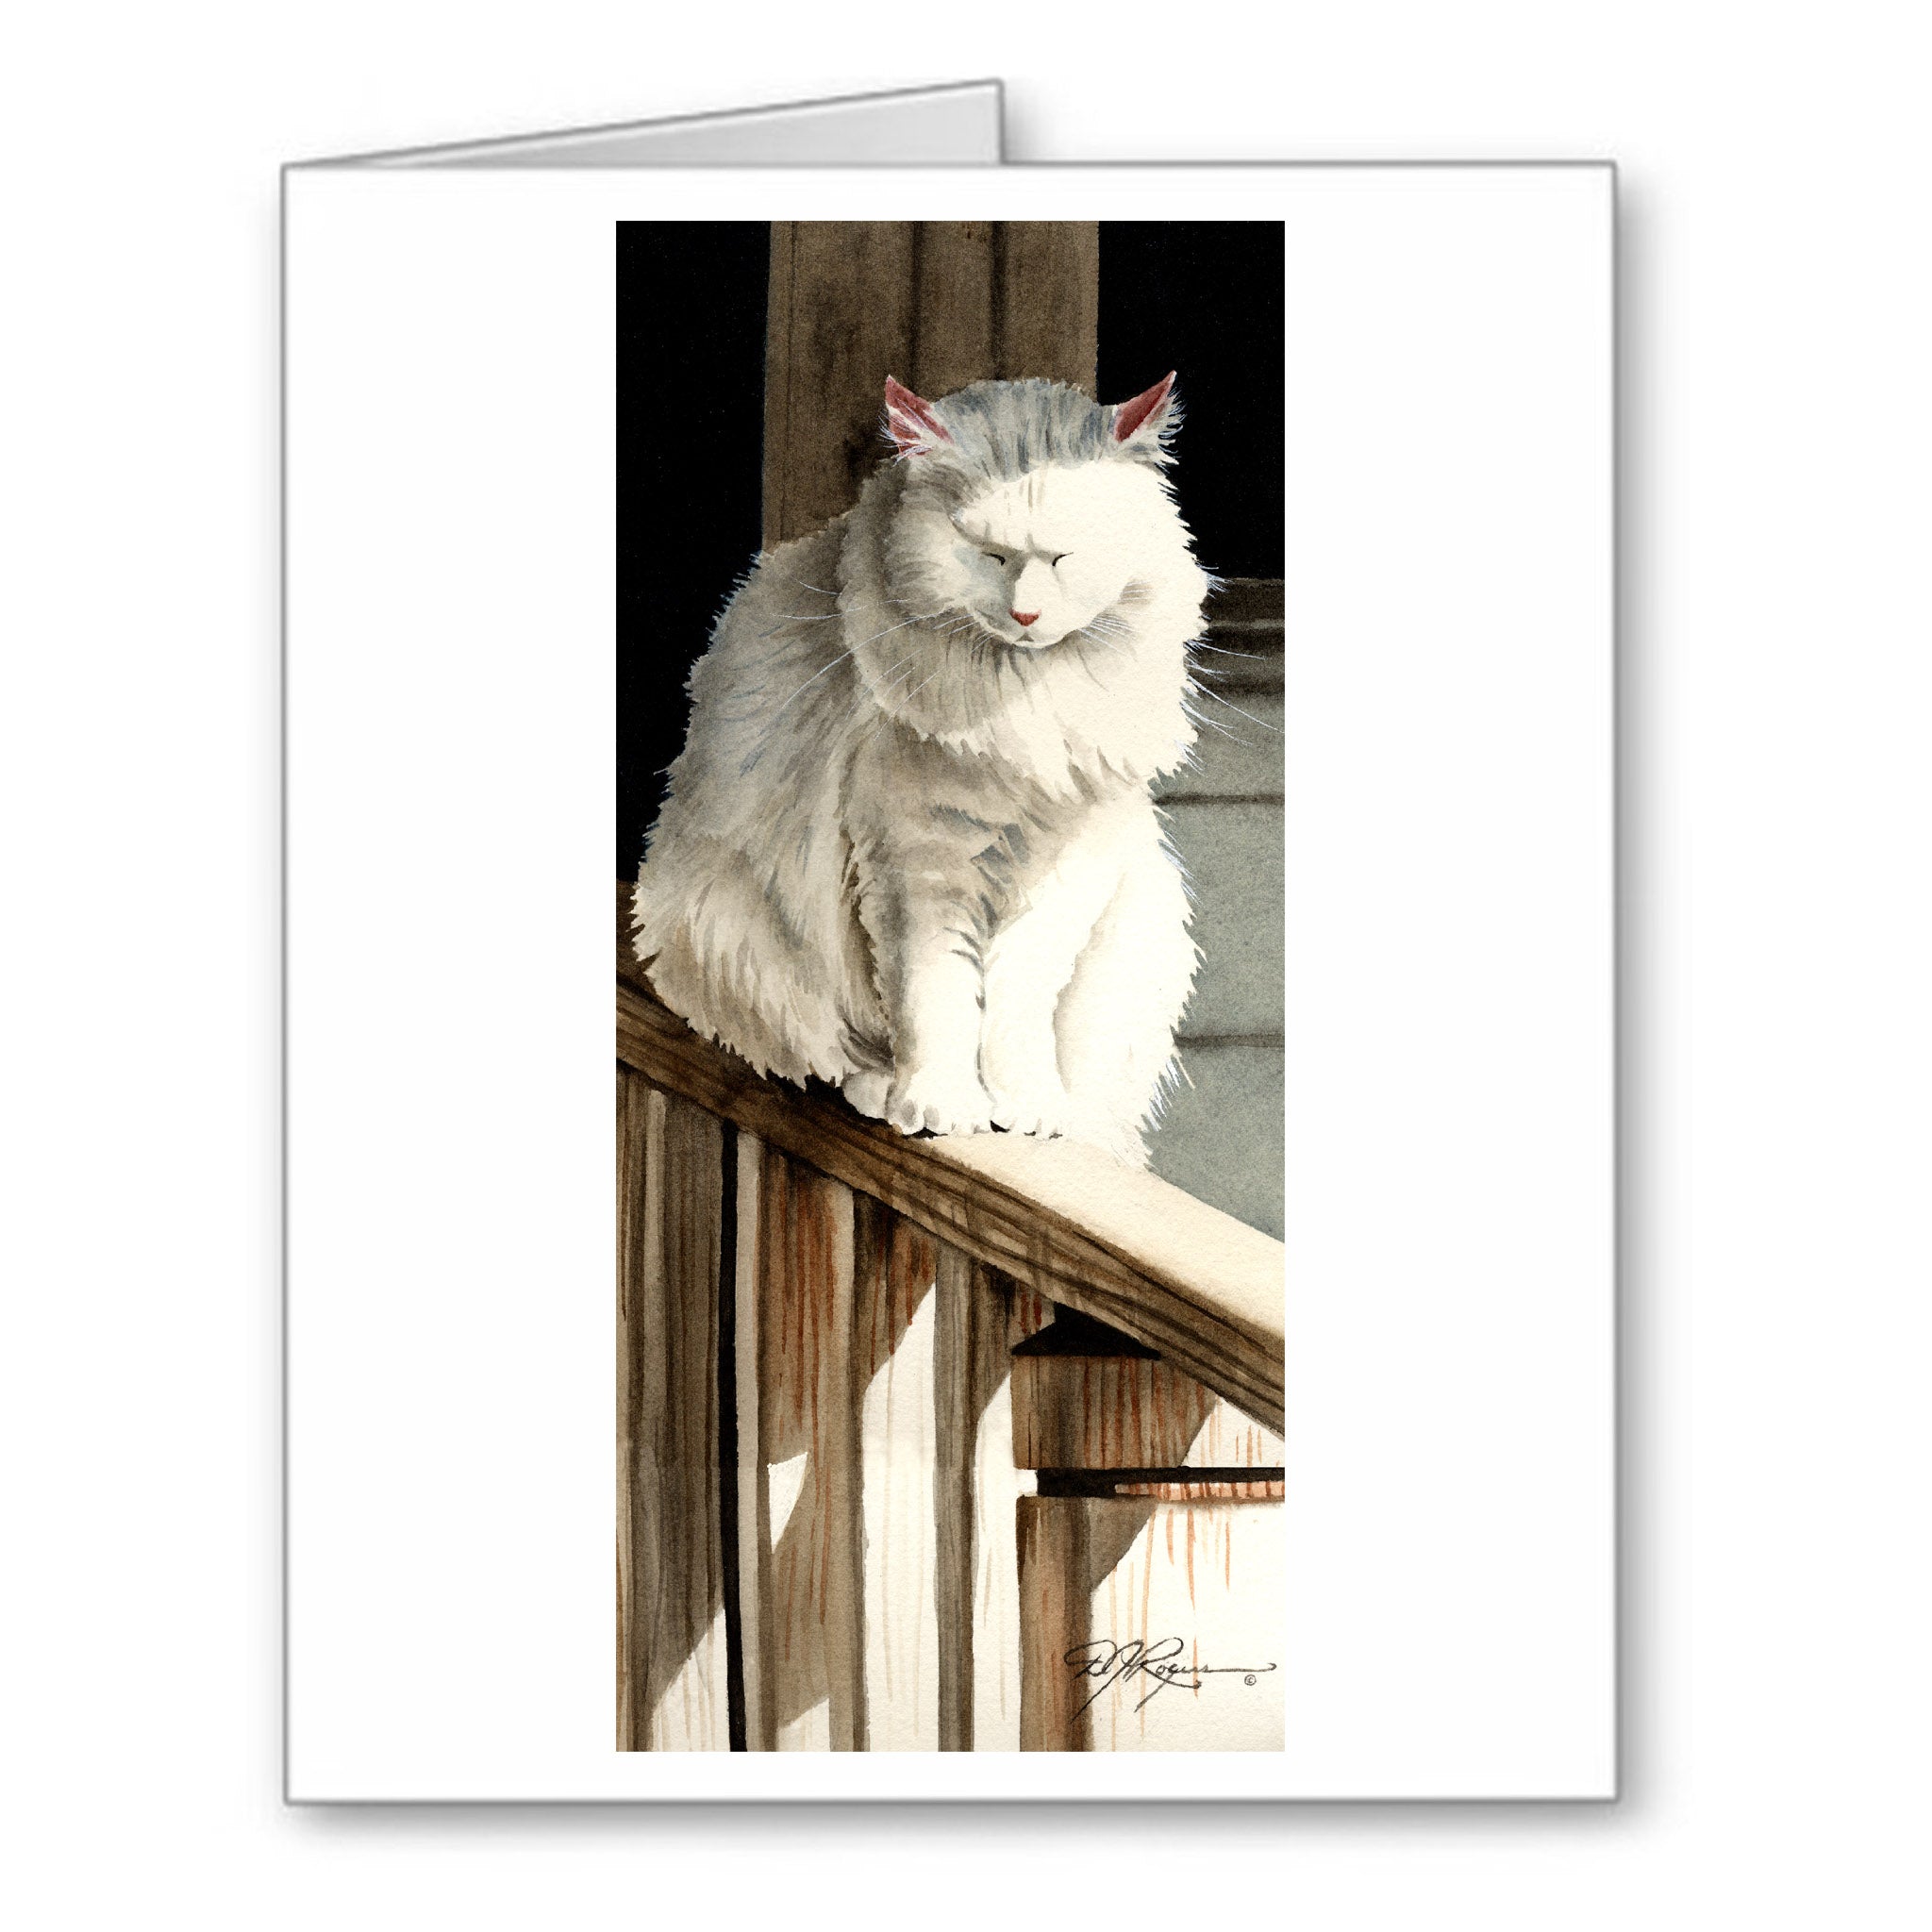 Cat Nap White Cat Watercolor Note Card Art by Artist DJ Rogers